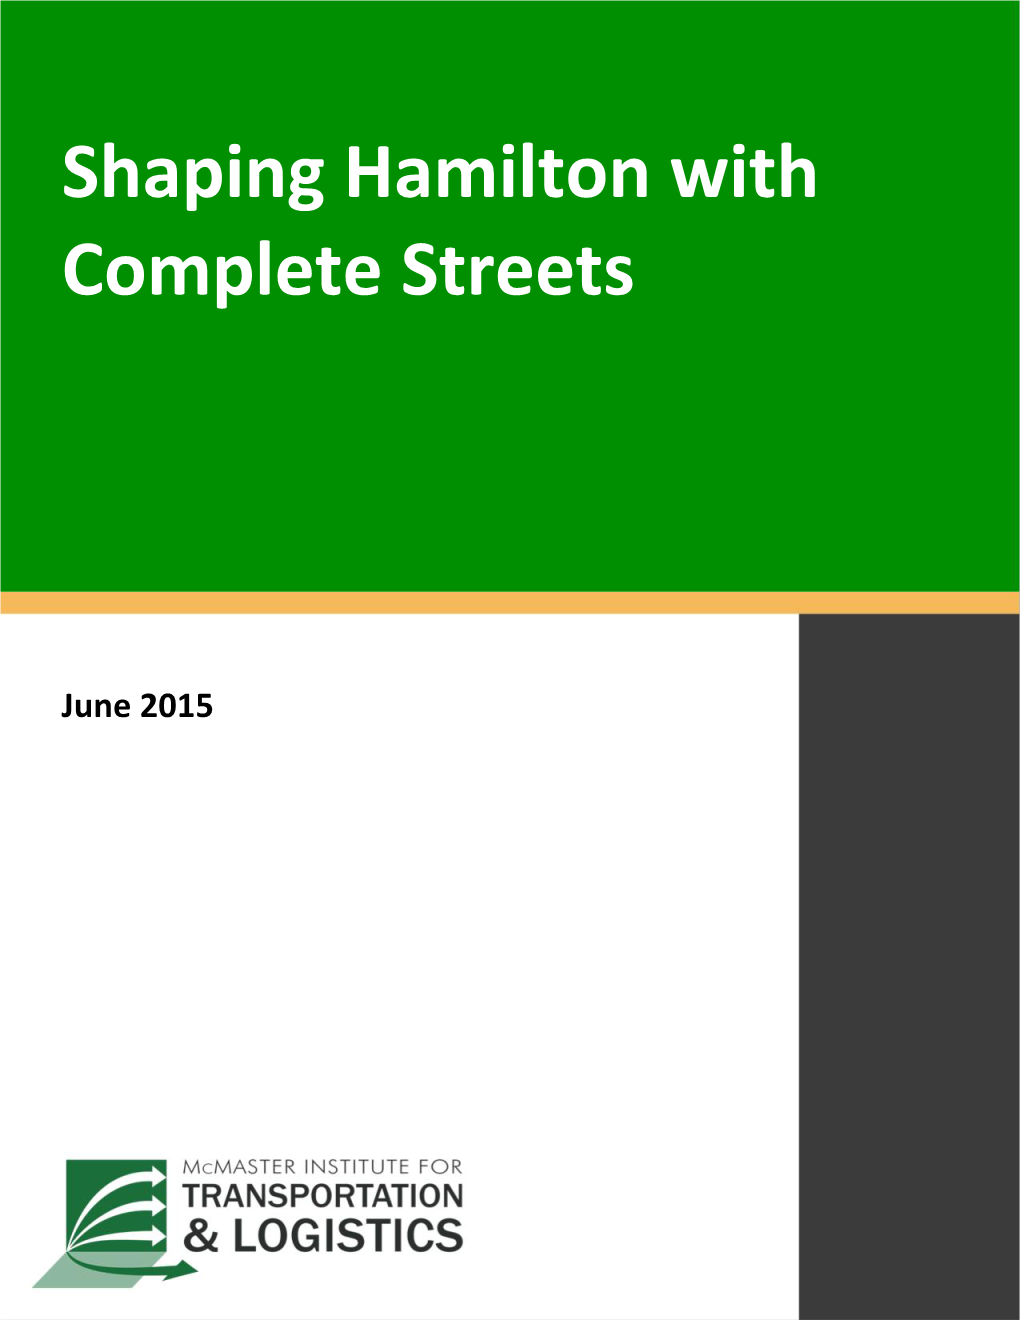 Shaping Hamilton with Complete Streets